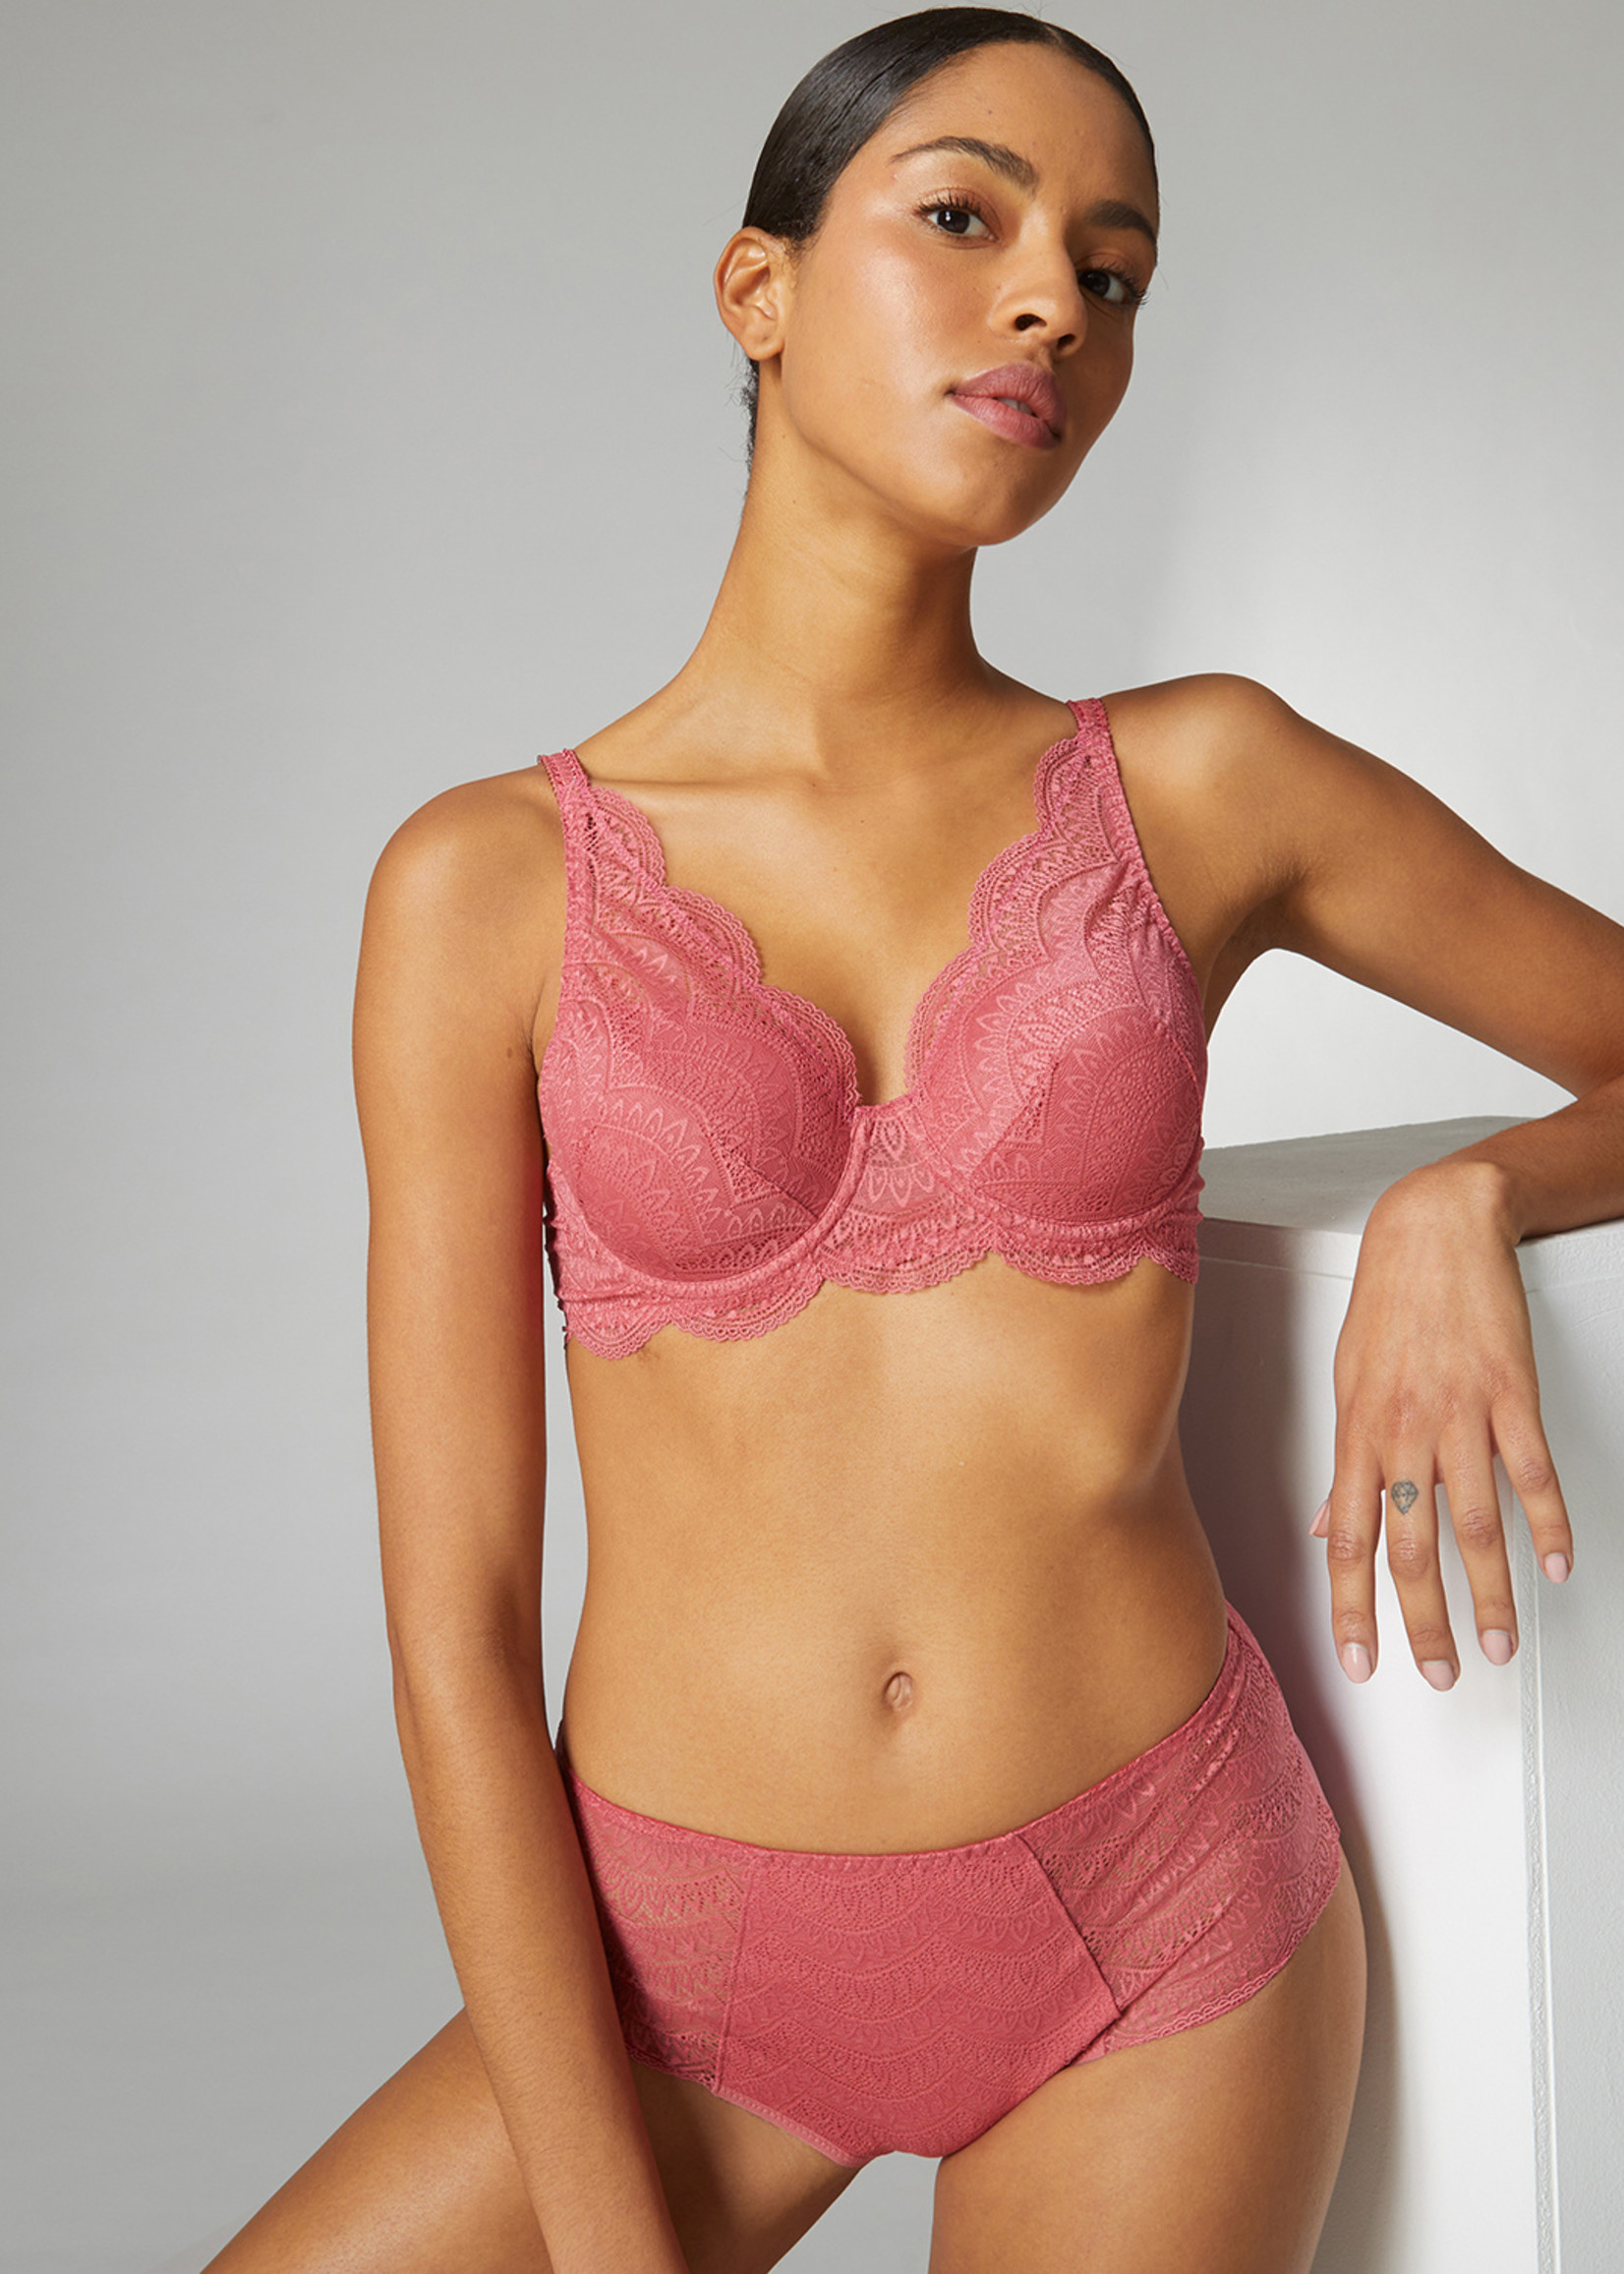 Simone Perele 12v Karma STRAPLESS PLUNGE BRA PEAU ROSE buy for the best  price CAD$ 130.00 - Canada and U.S. delivery – Bralissimo